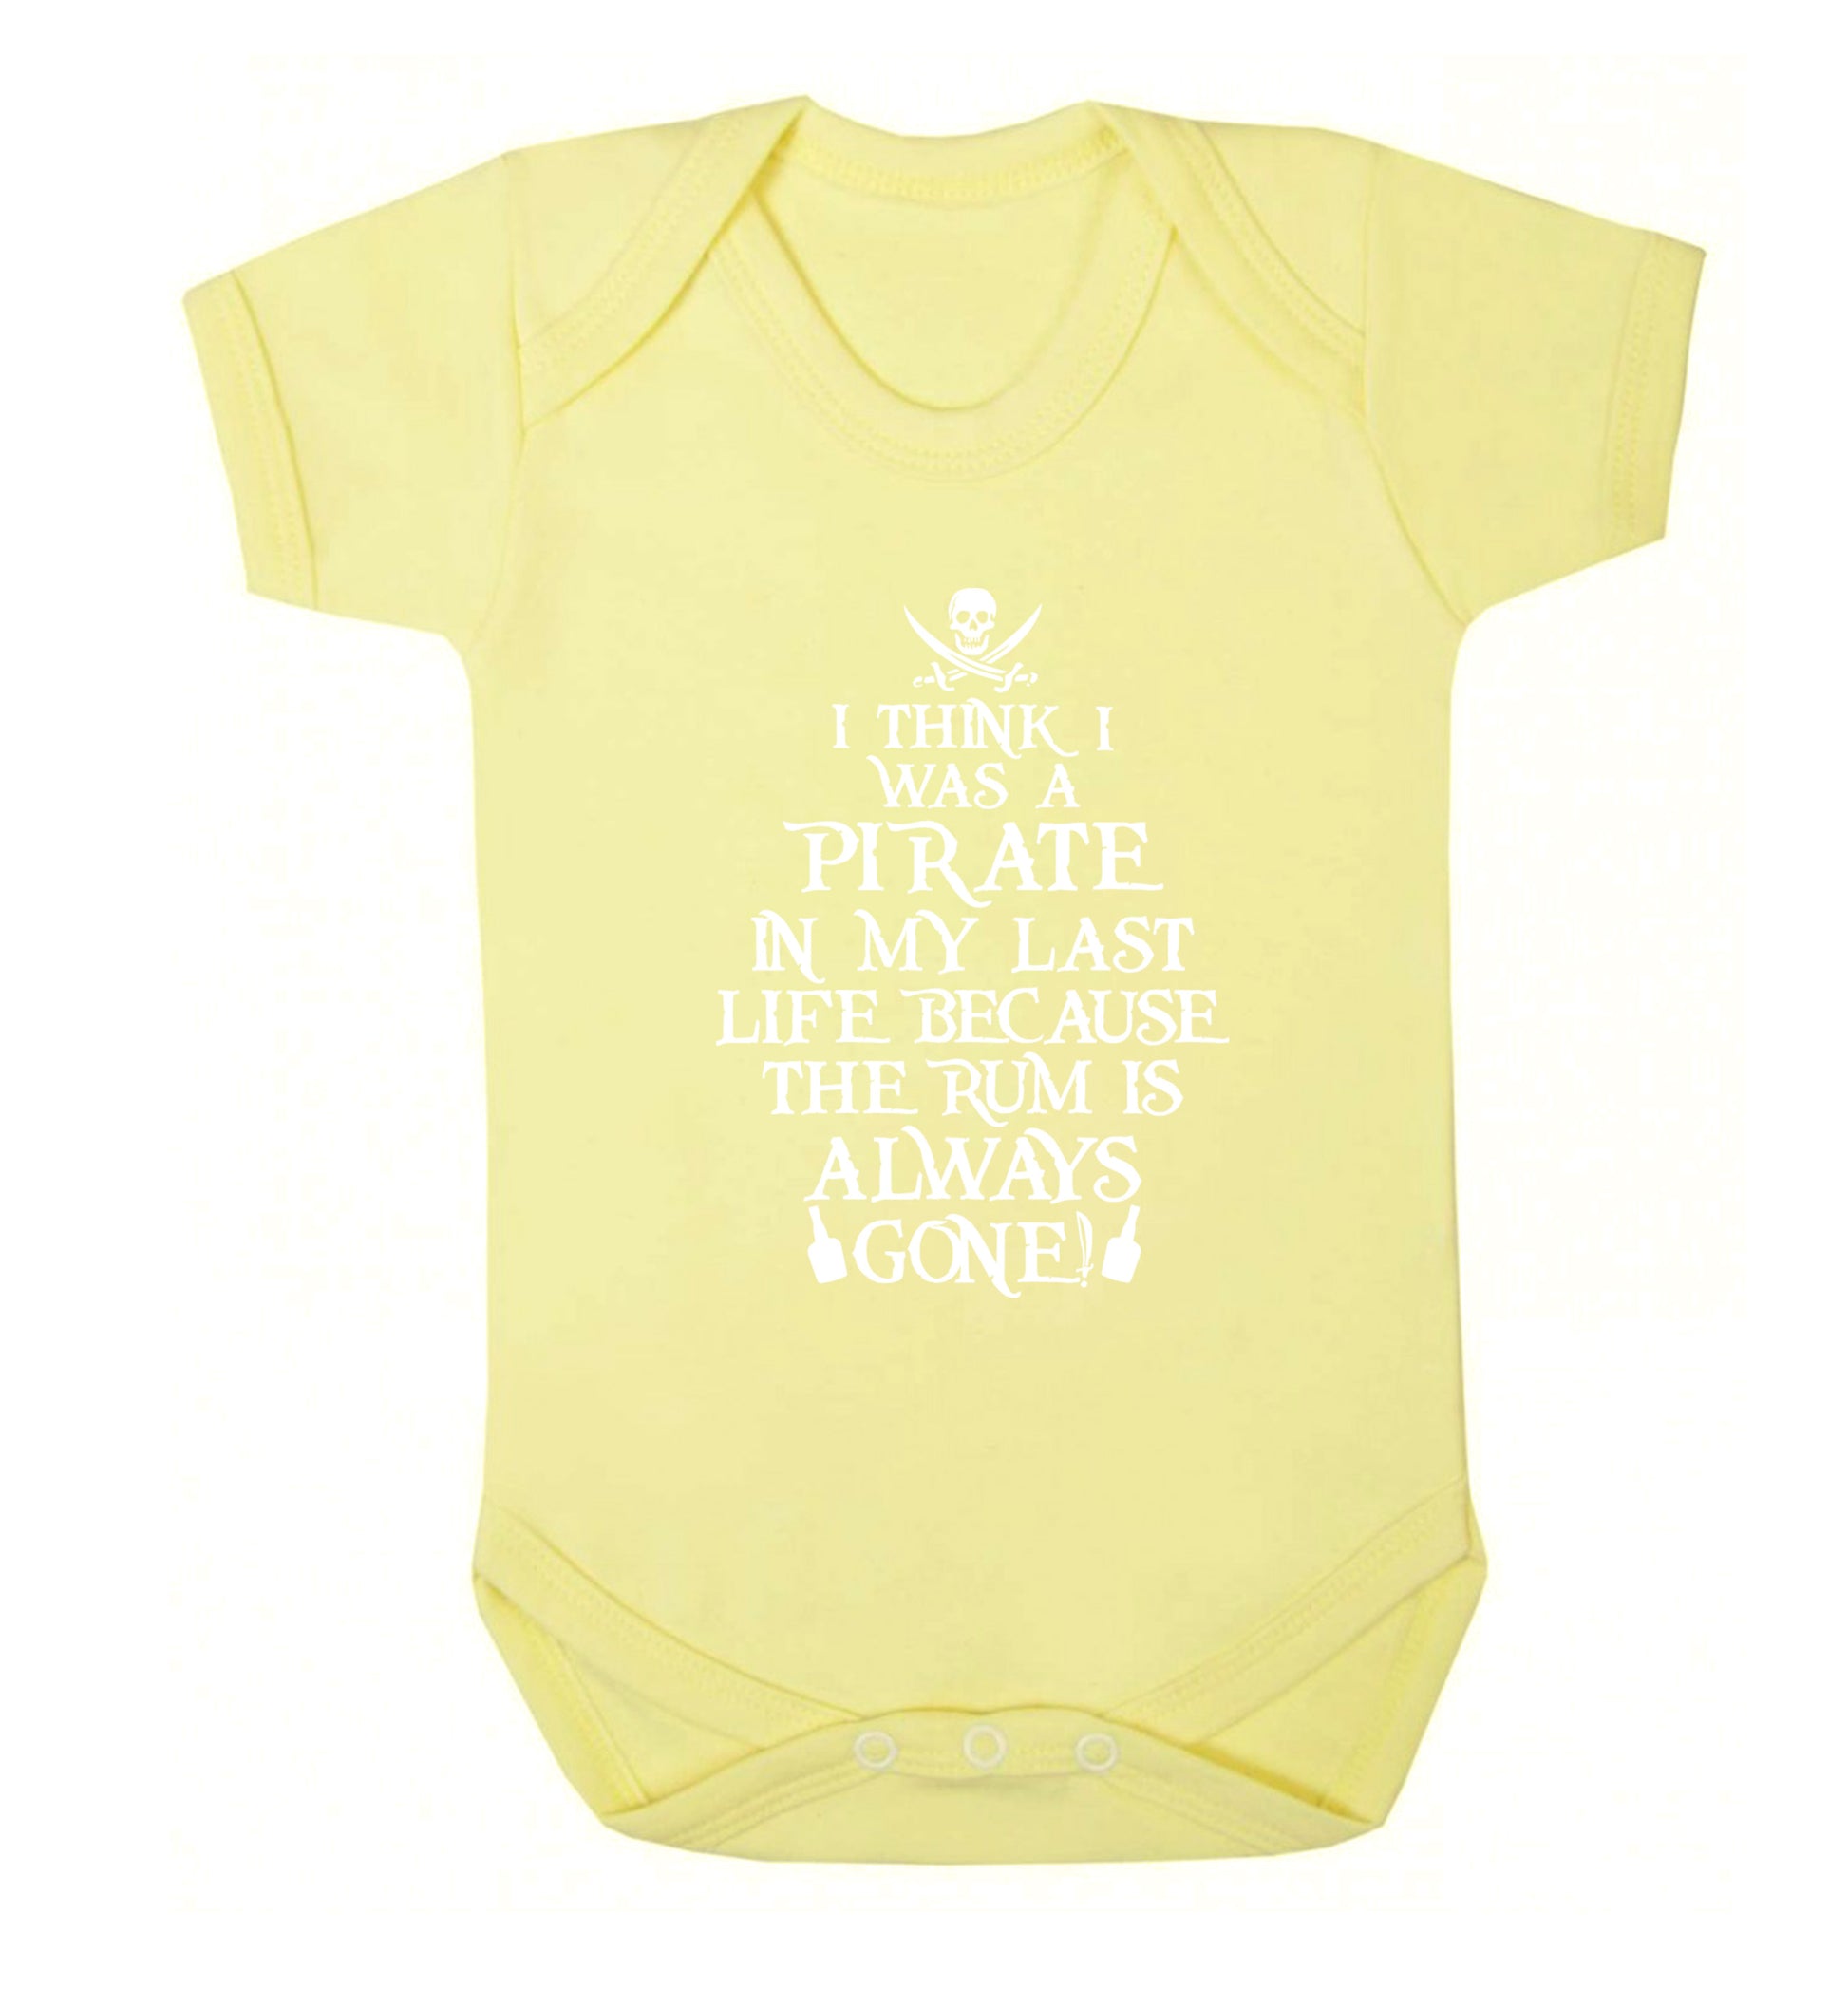 I think I was a pirate in my past life because the rum is always gone! Baby Vest pale yellow 18-24 months